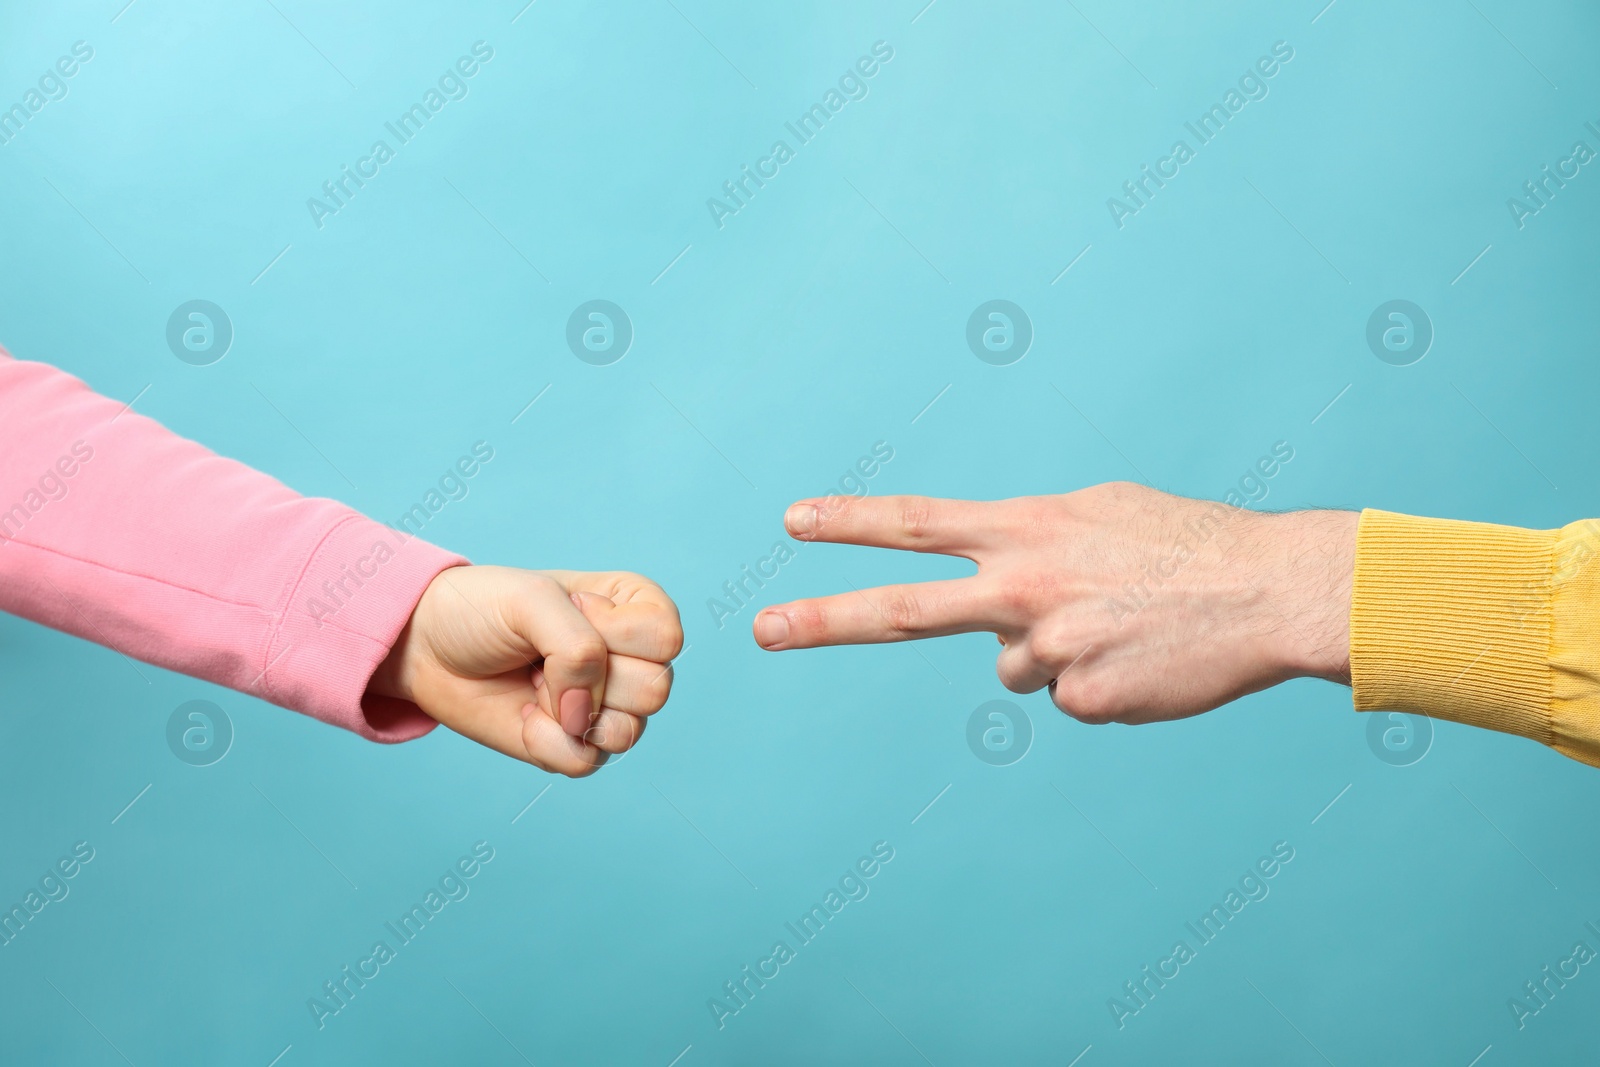 Photo of People playing rock, paper and scissors on light blue background, closeup